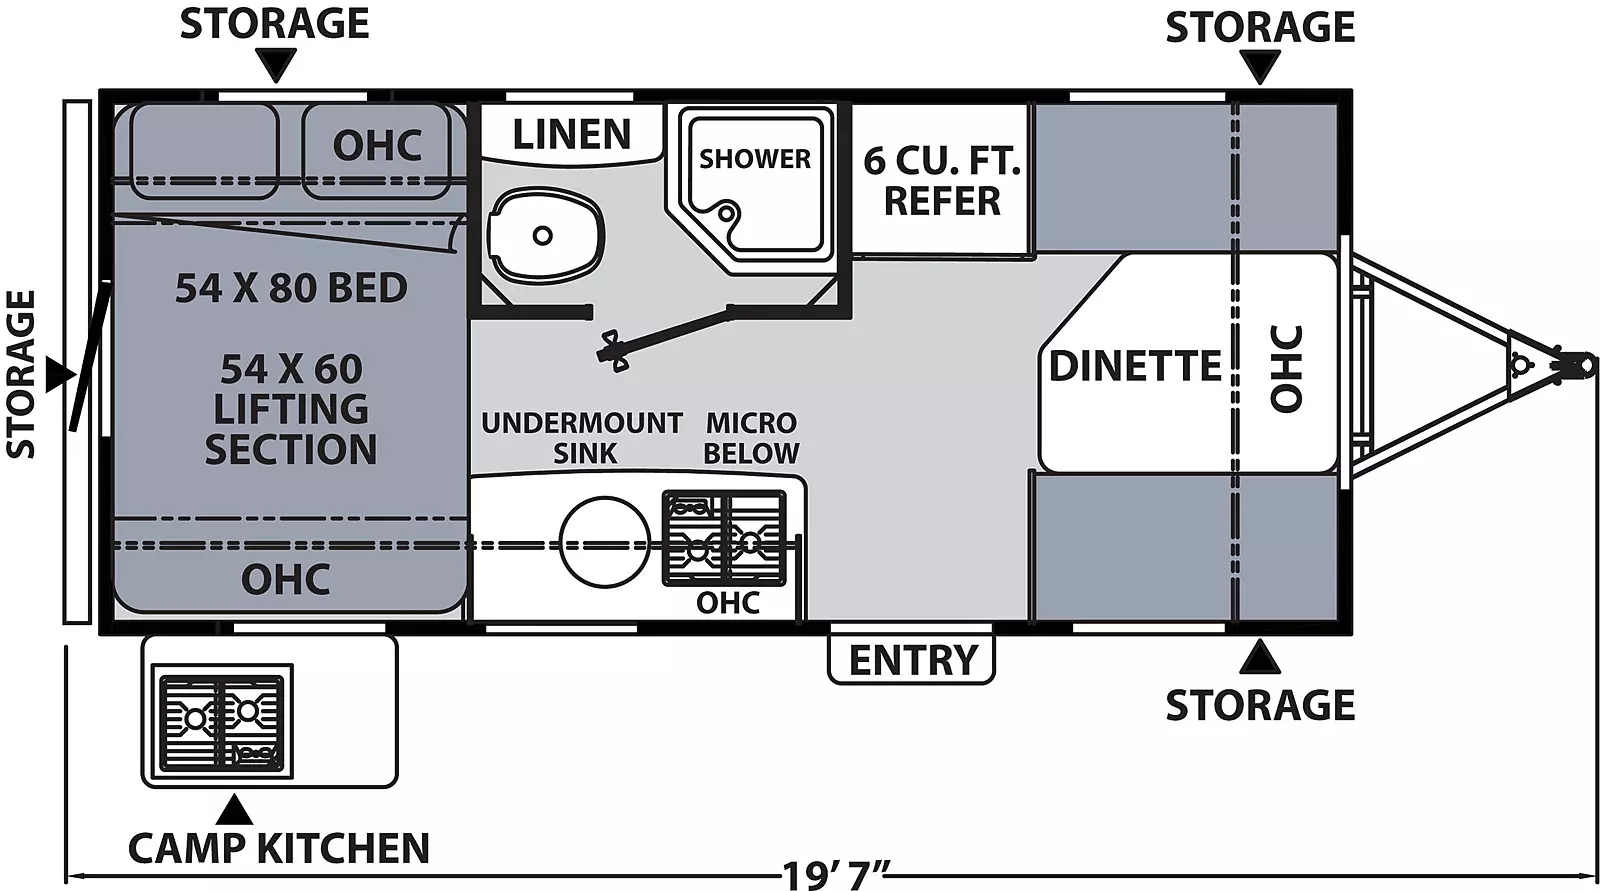 The 16R has no slide outs and one entry door on the door side. Interior layout from front to back: front dinette with overhead cabinets, off-door side refrigerator next to the side aisle off-door side bathroom. Door side stove top, microwave and sink. Rear 54X80 side facing bed with cabinets overhead. Camp kitchen located on the rear door side.